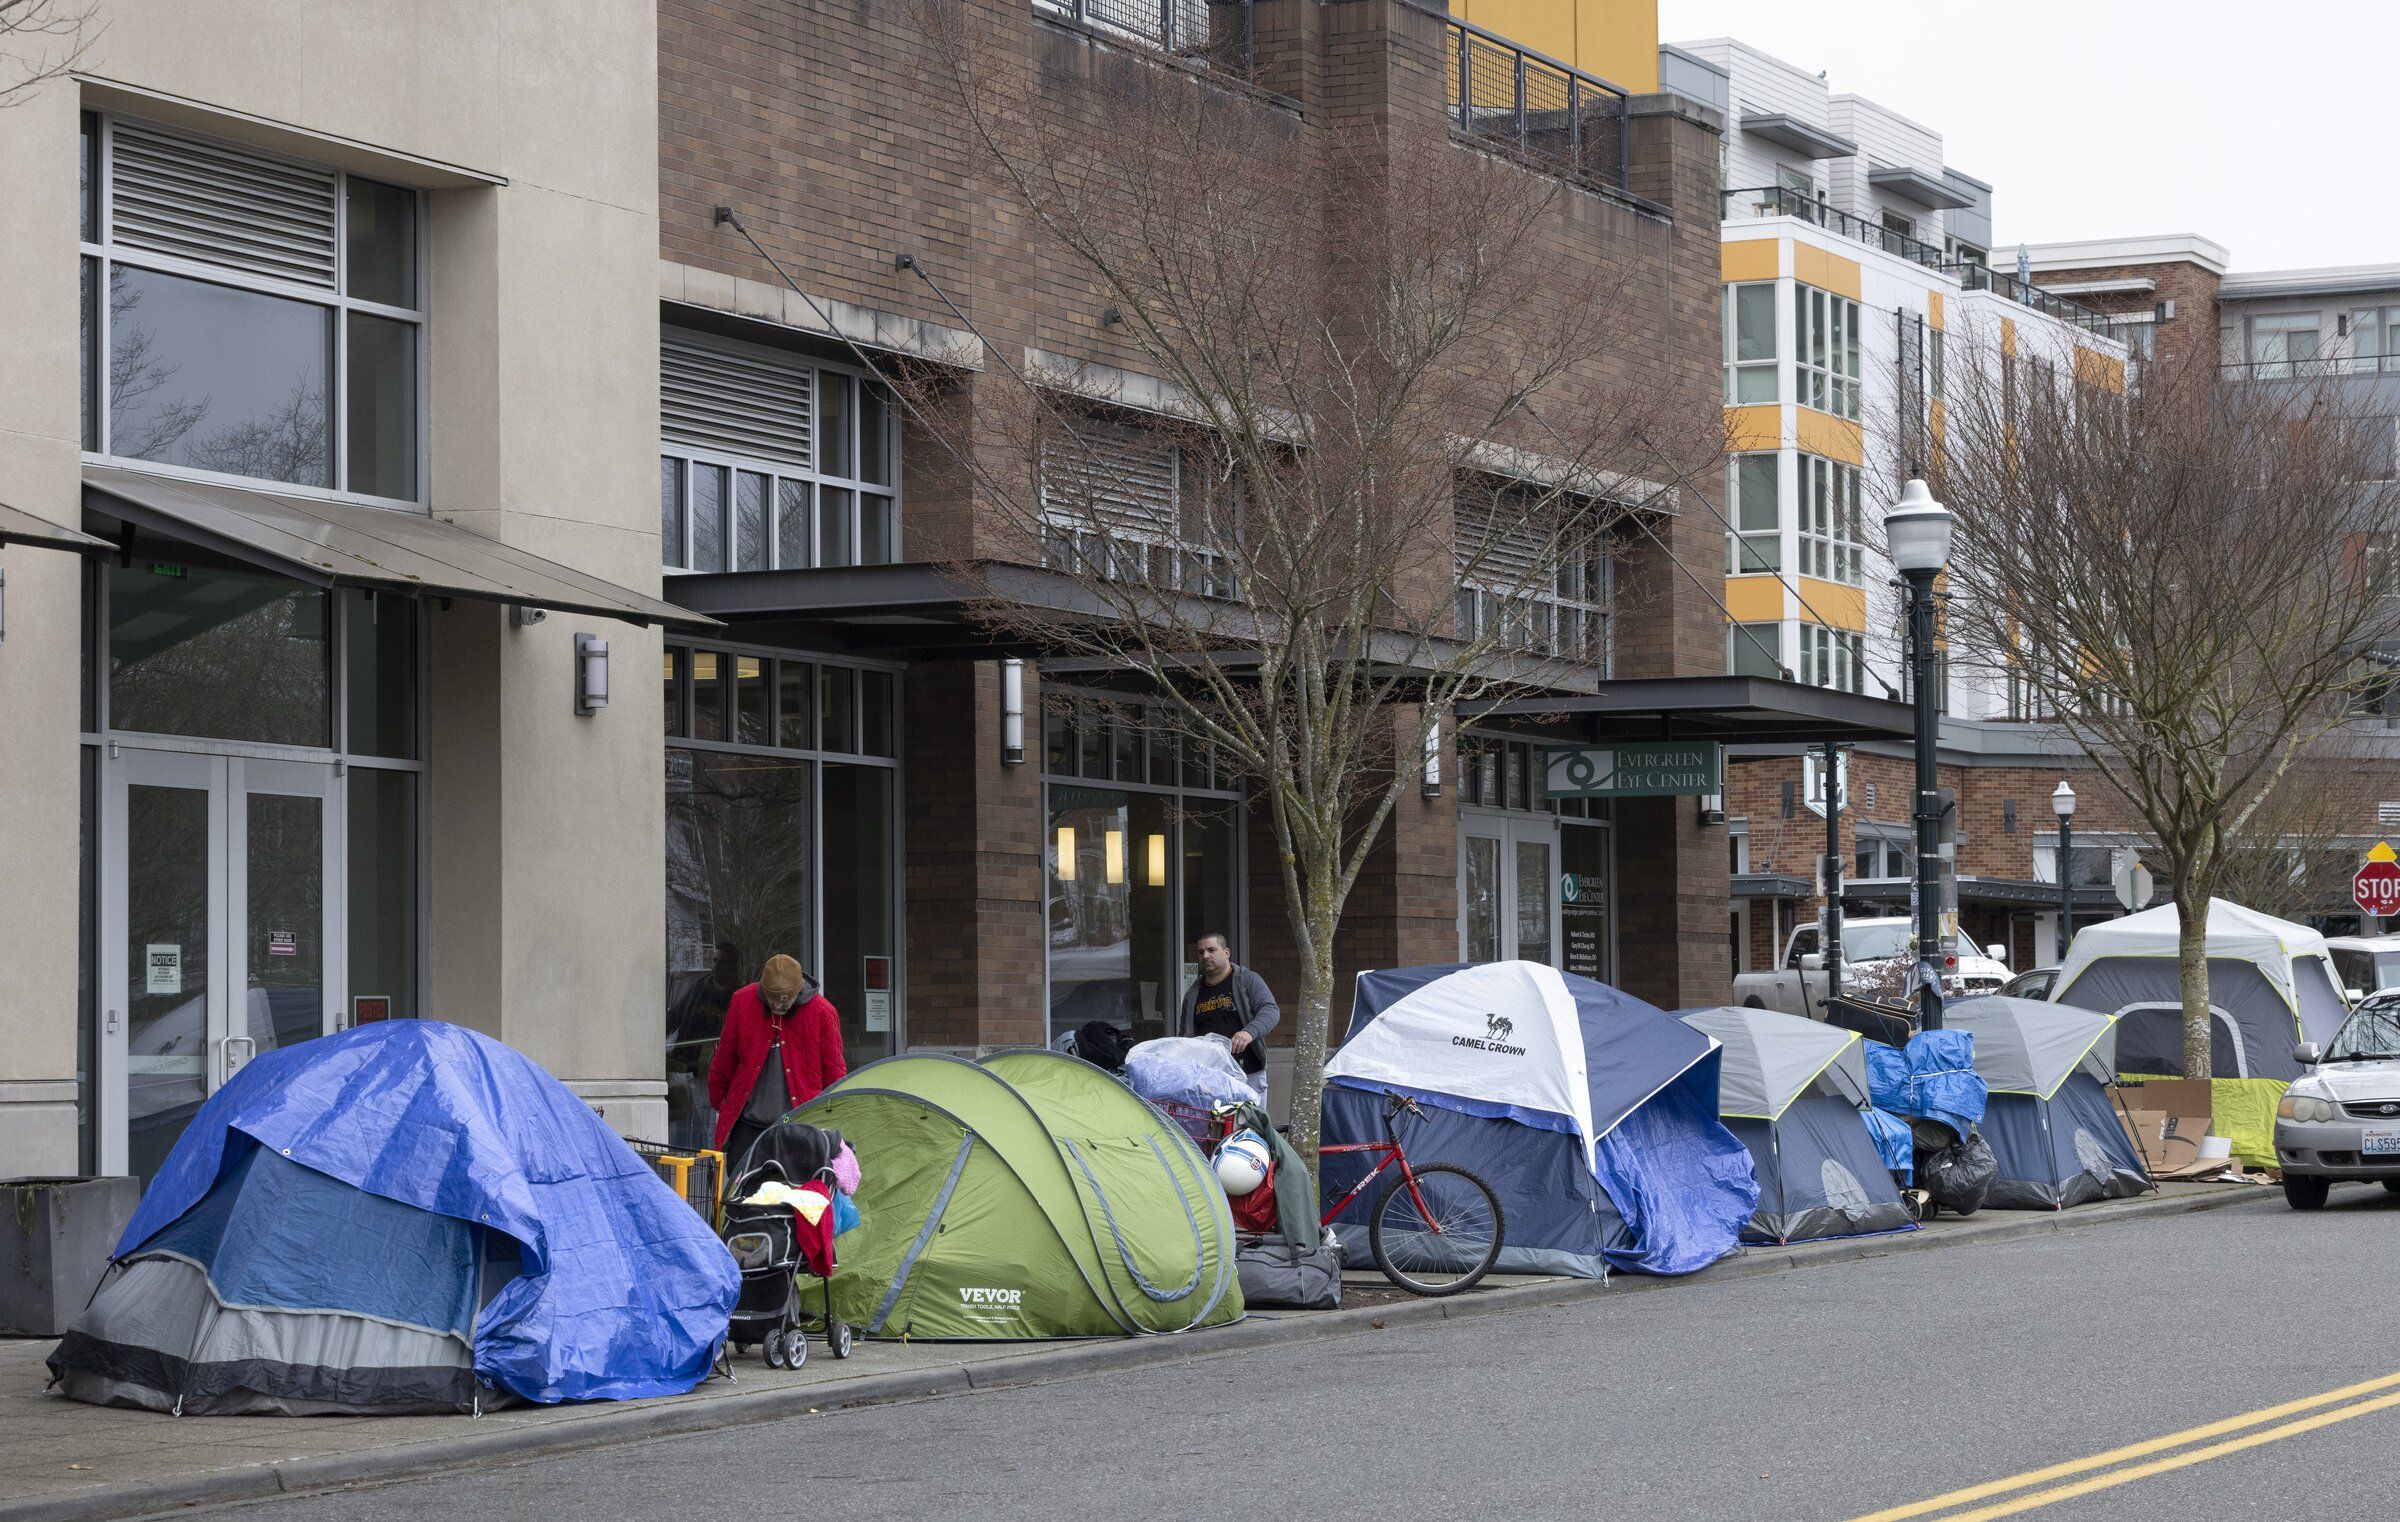 burien seeks new police chief after sheriff refuses to enforce camping ban